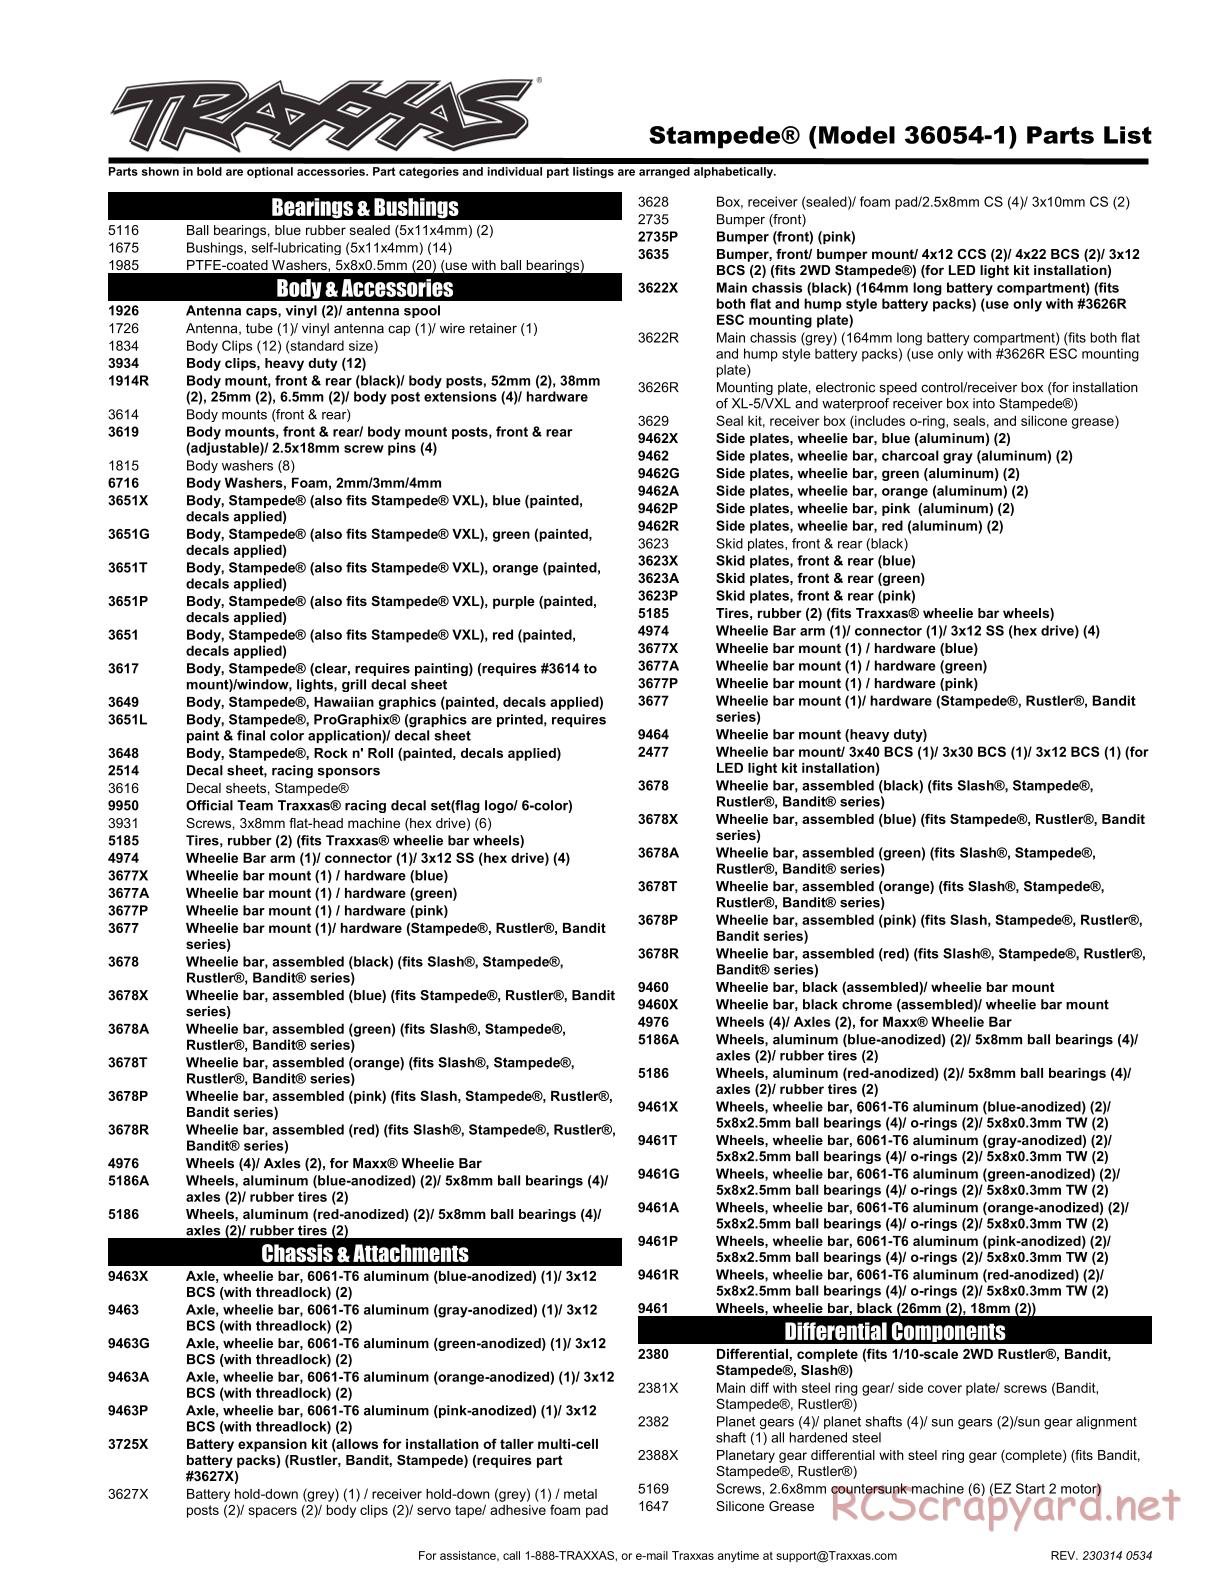 Traxxas - Stampede XL-5 (2018) - Parts List - Page 1